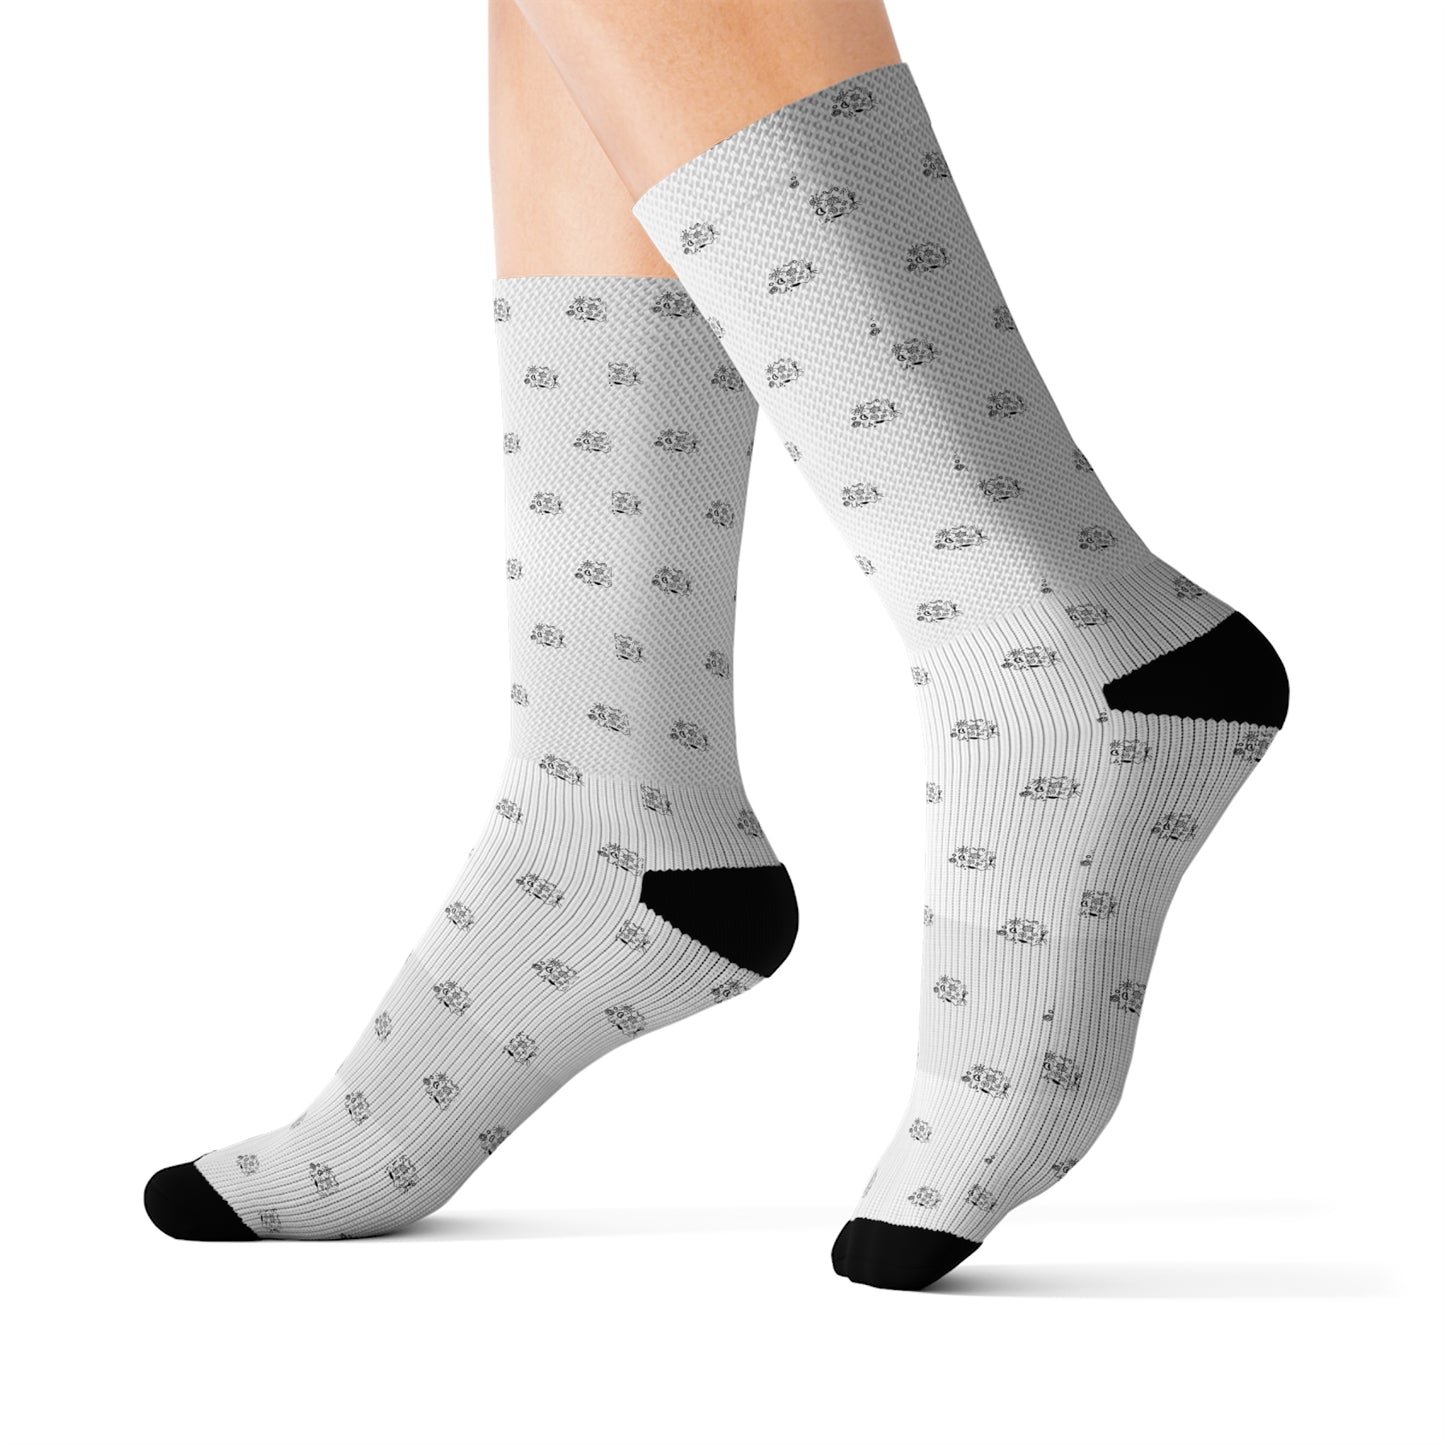 Infectious Diseases, Covid, Germs, Microbiology, Infectious Disease, Epidemiology, Public Health, ID specialist socks